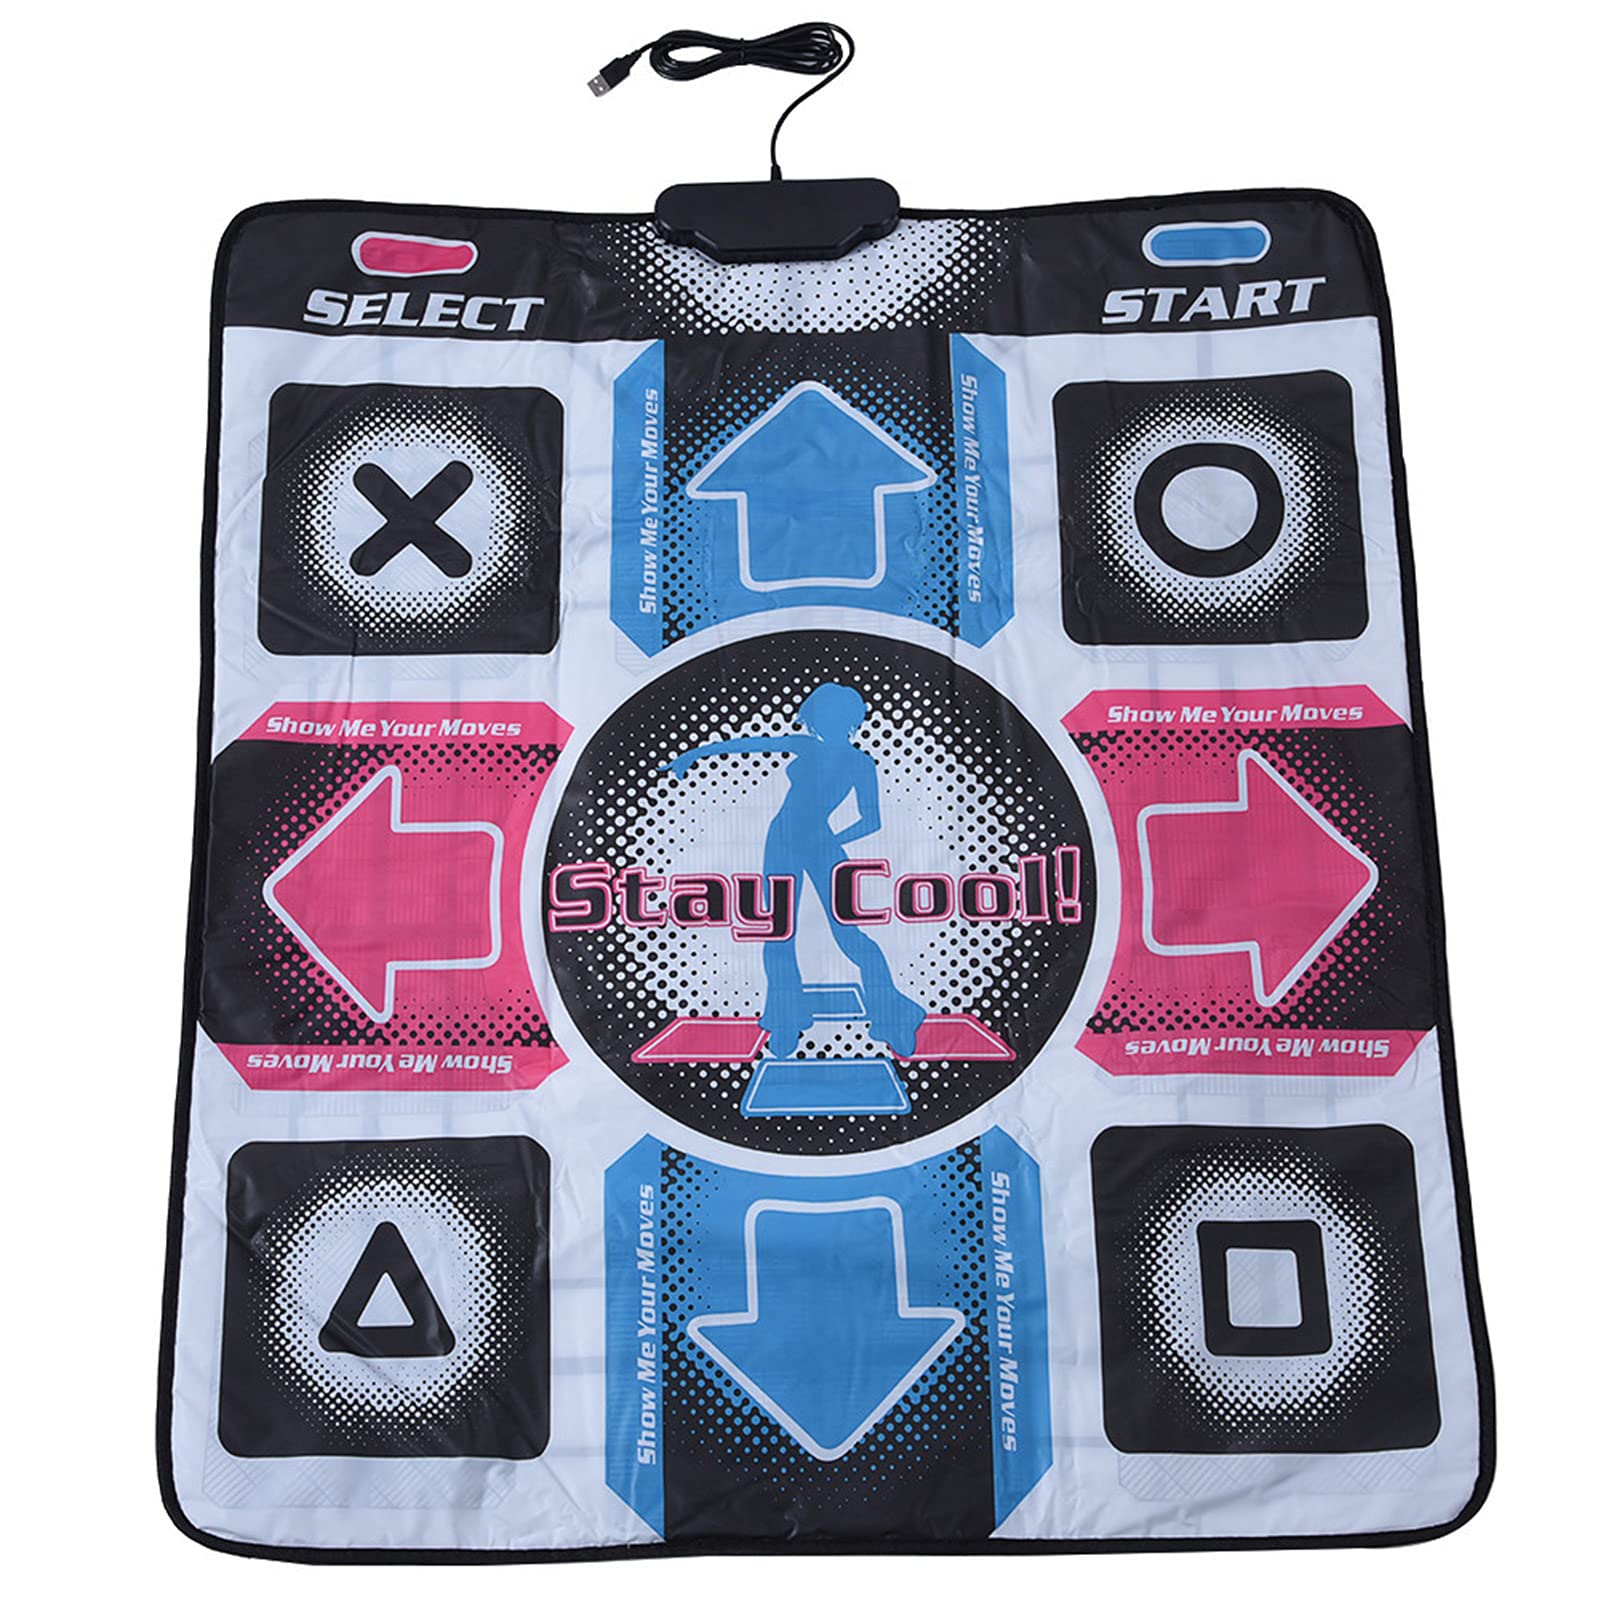 USB Dance Pad, Non-Slip Dancing Step Floor Mat Electronic Musical Carpet Wear Resistant Dancer Blanket Yoga Play Home Dance Machine Gift for Family Girls Boys Adults PC Laptop Computer Video Game